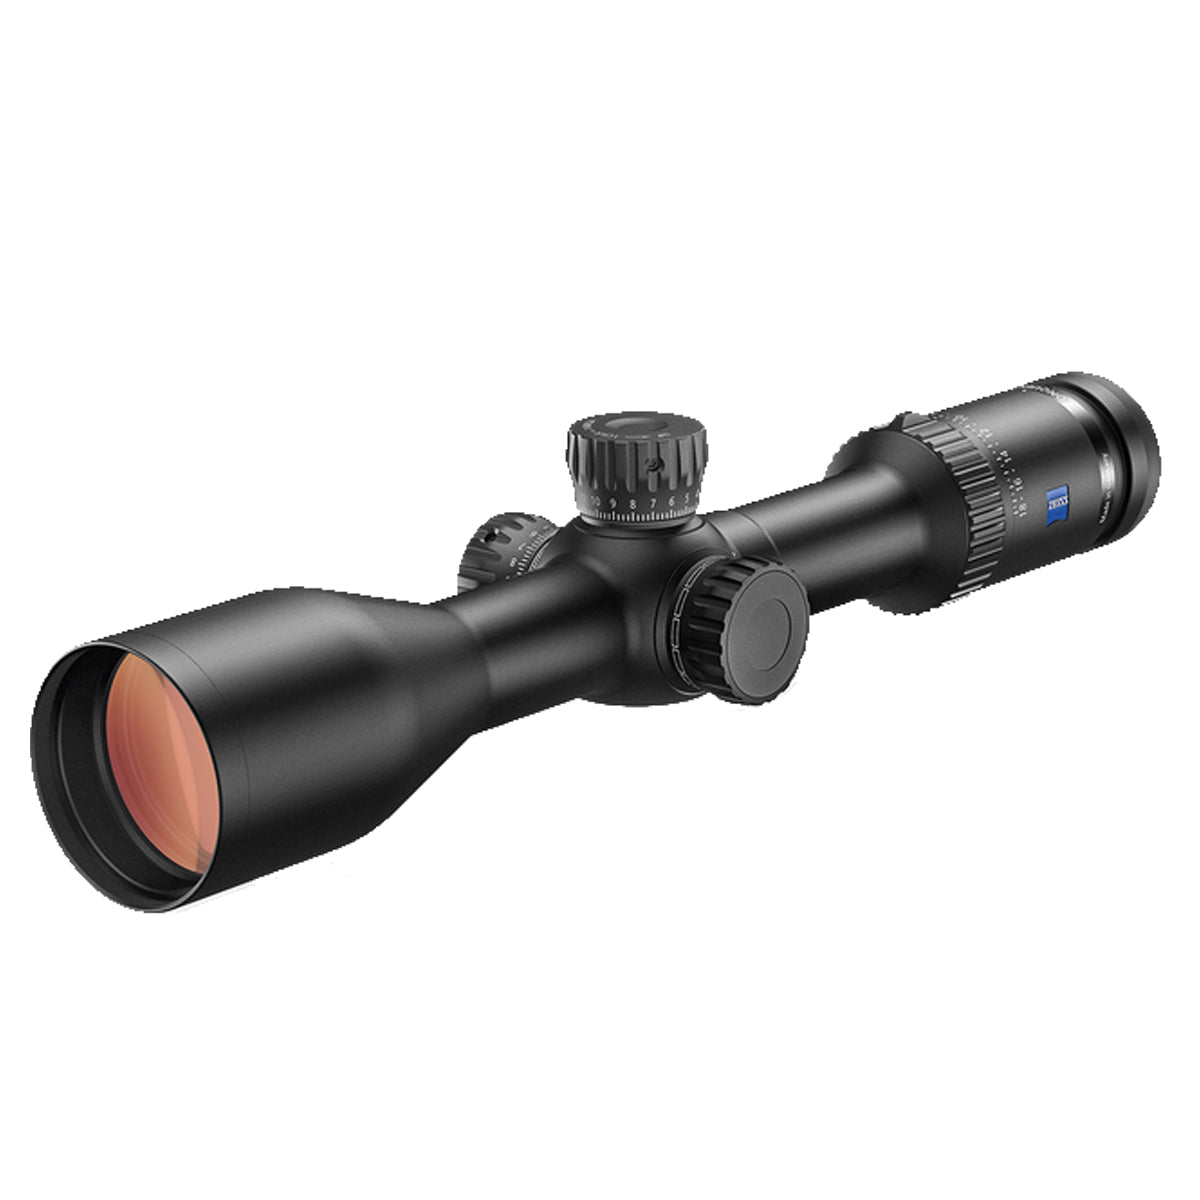 Zeiss Conquest V6 3-18x50 w/ #6 Plex Reticle Rifle Scope in  by GOHUNT | Zeiss - GOHUNT Shop